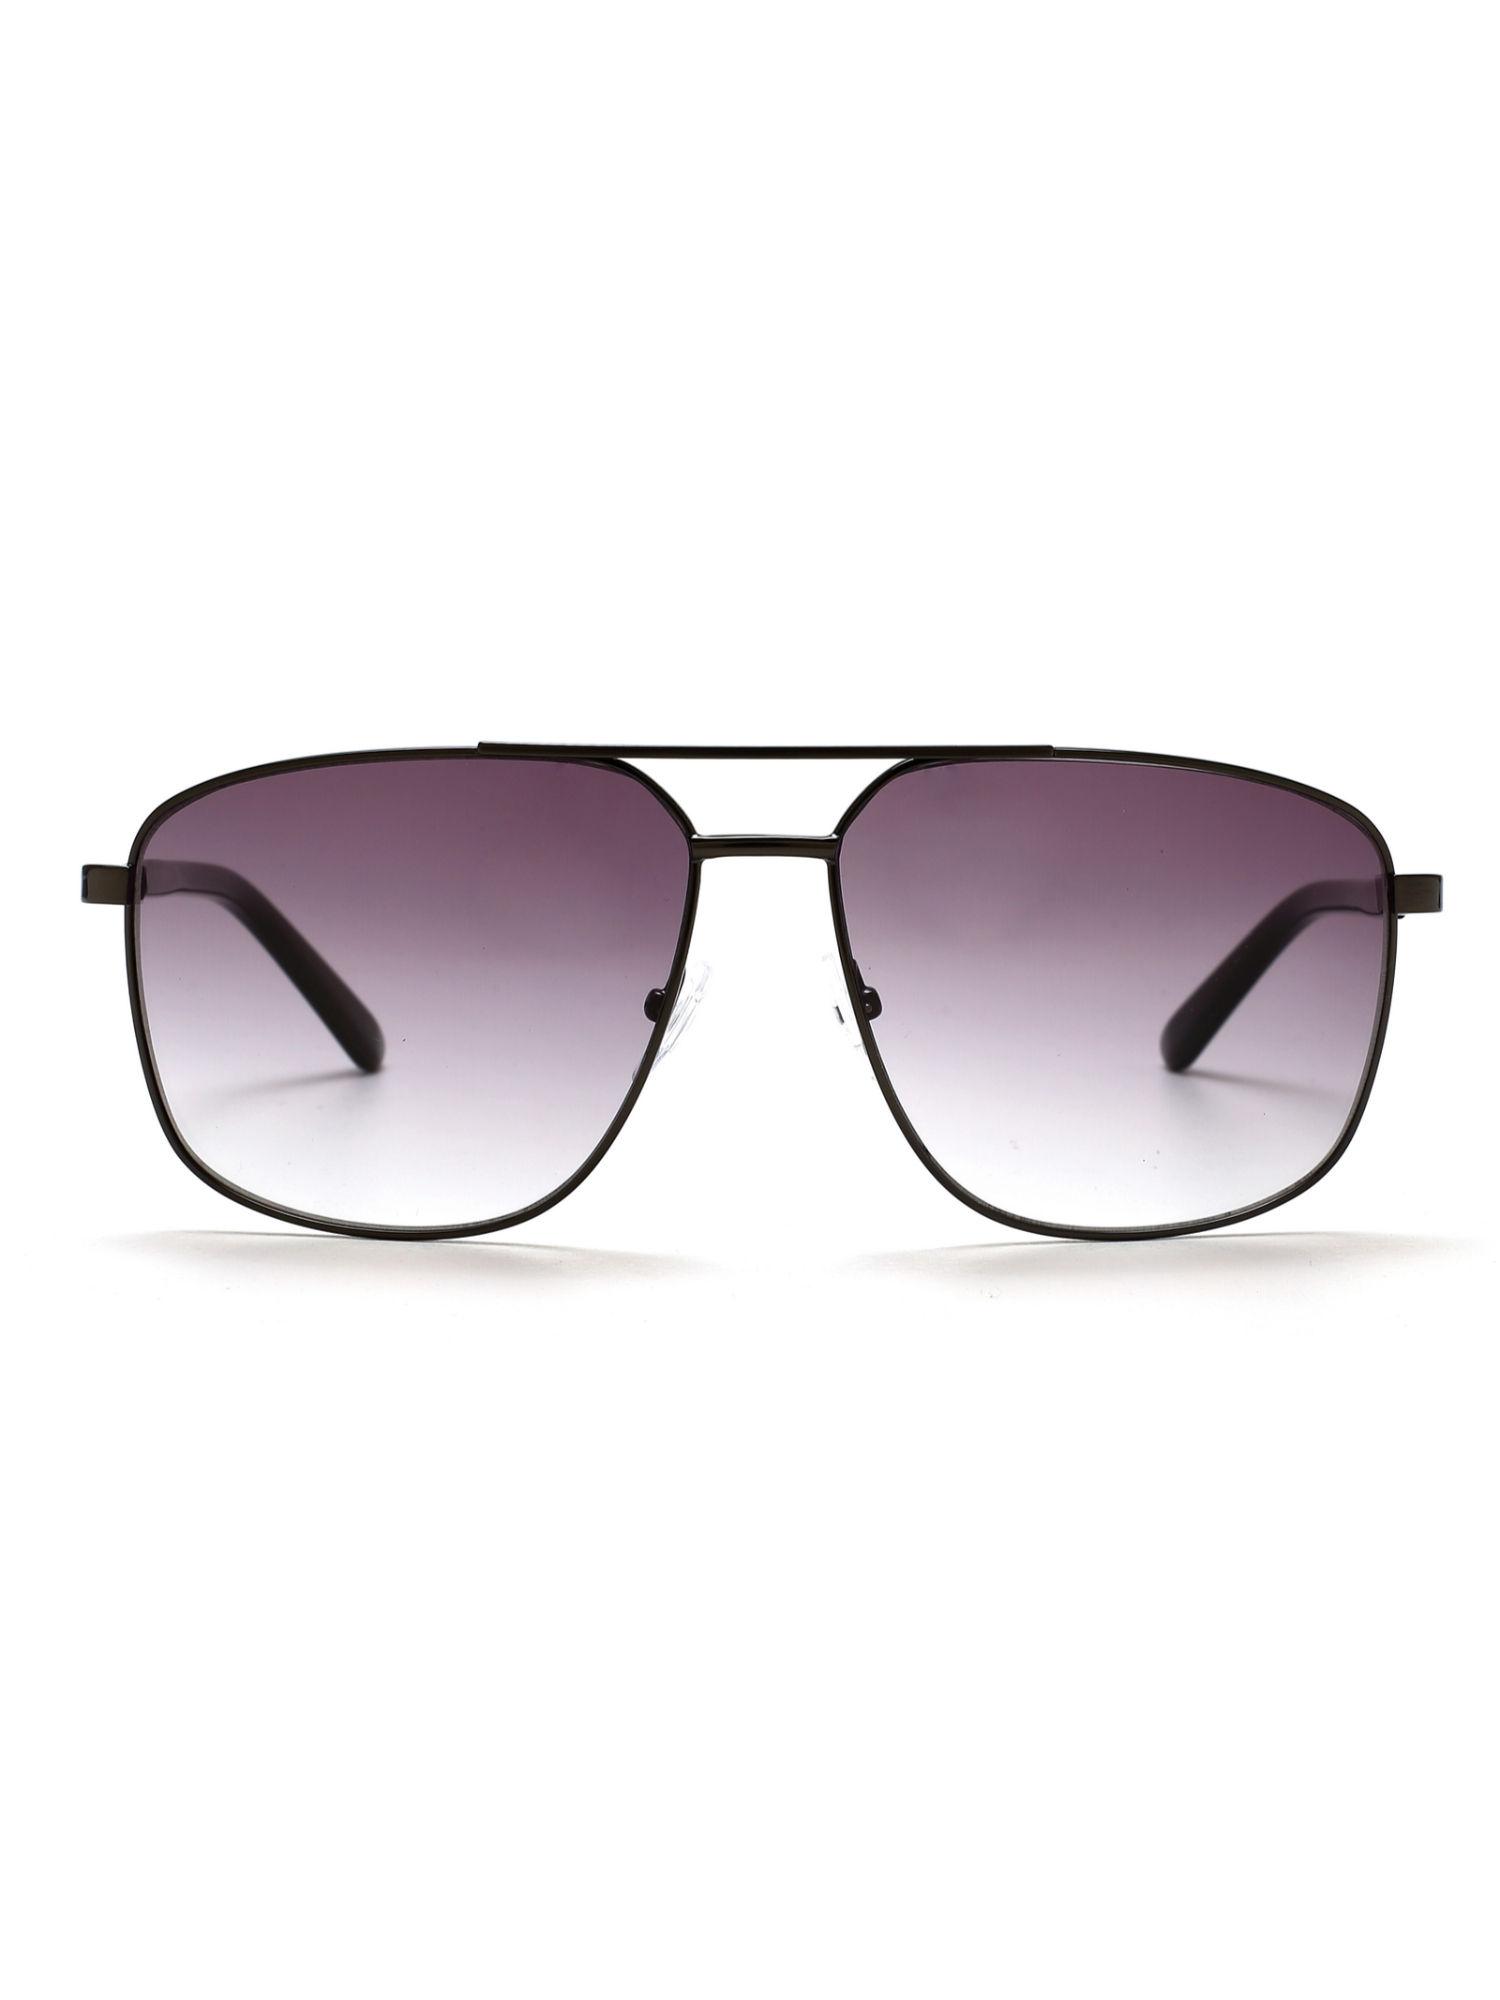 rectangle sunglasses with blue lens for men